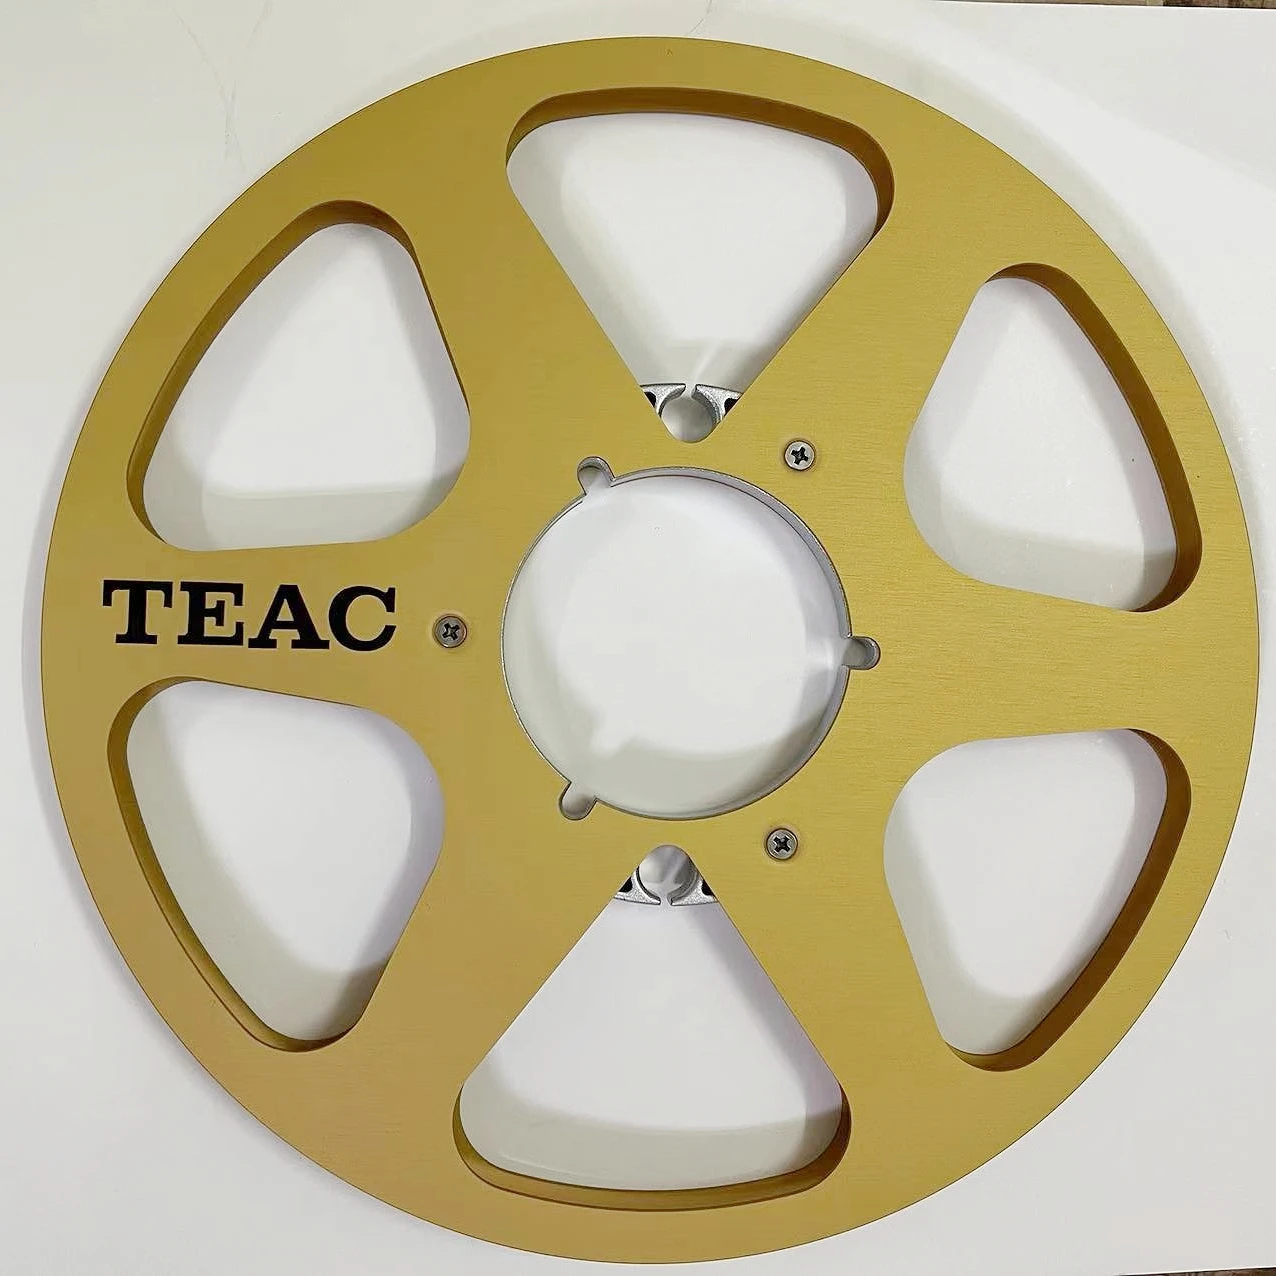 1/4 10.5 Inch Open Reel Audio Tape Empty Nab Hub Reel-To-Reel Recorders  With Disk New Aluminum Accessories By teac